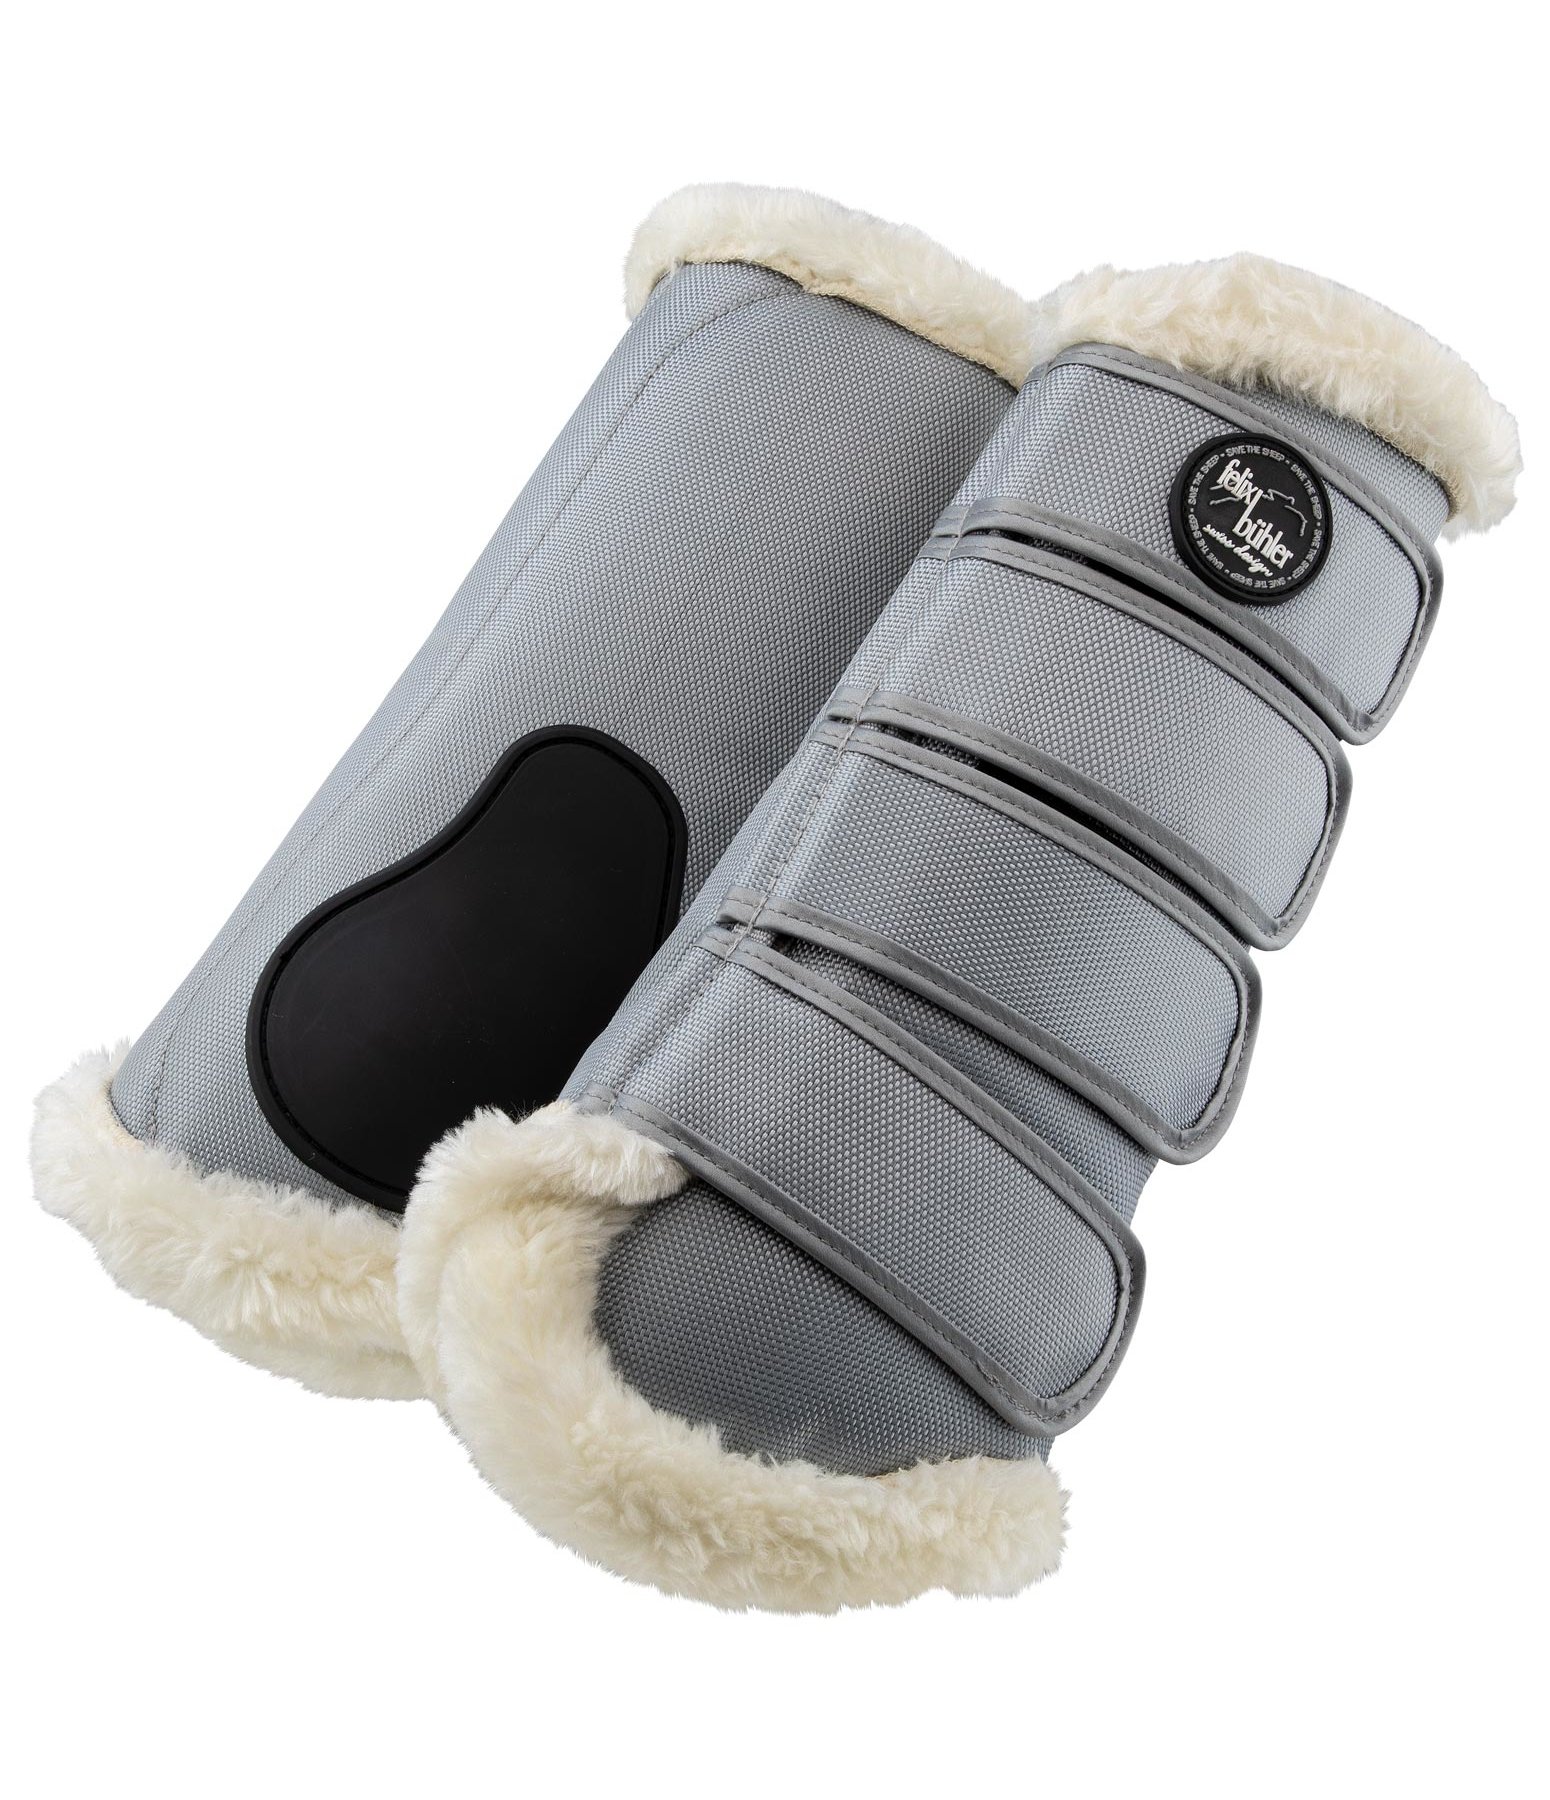 Save the Sheep Dressage Boots Pirouette, hind legs